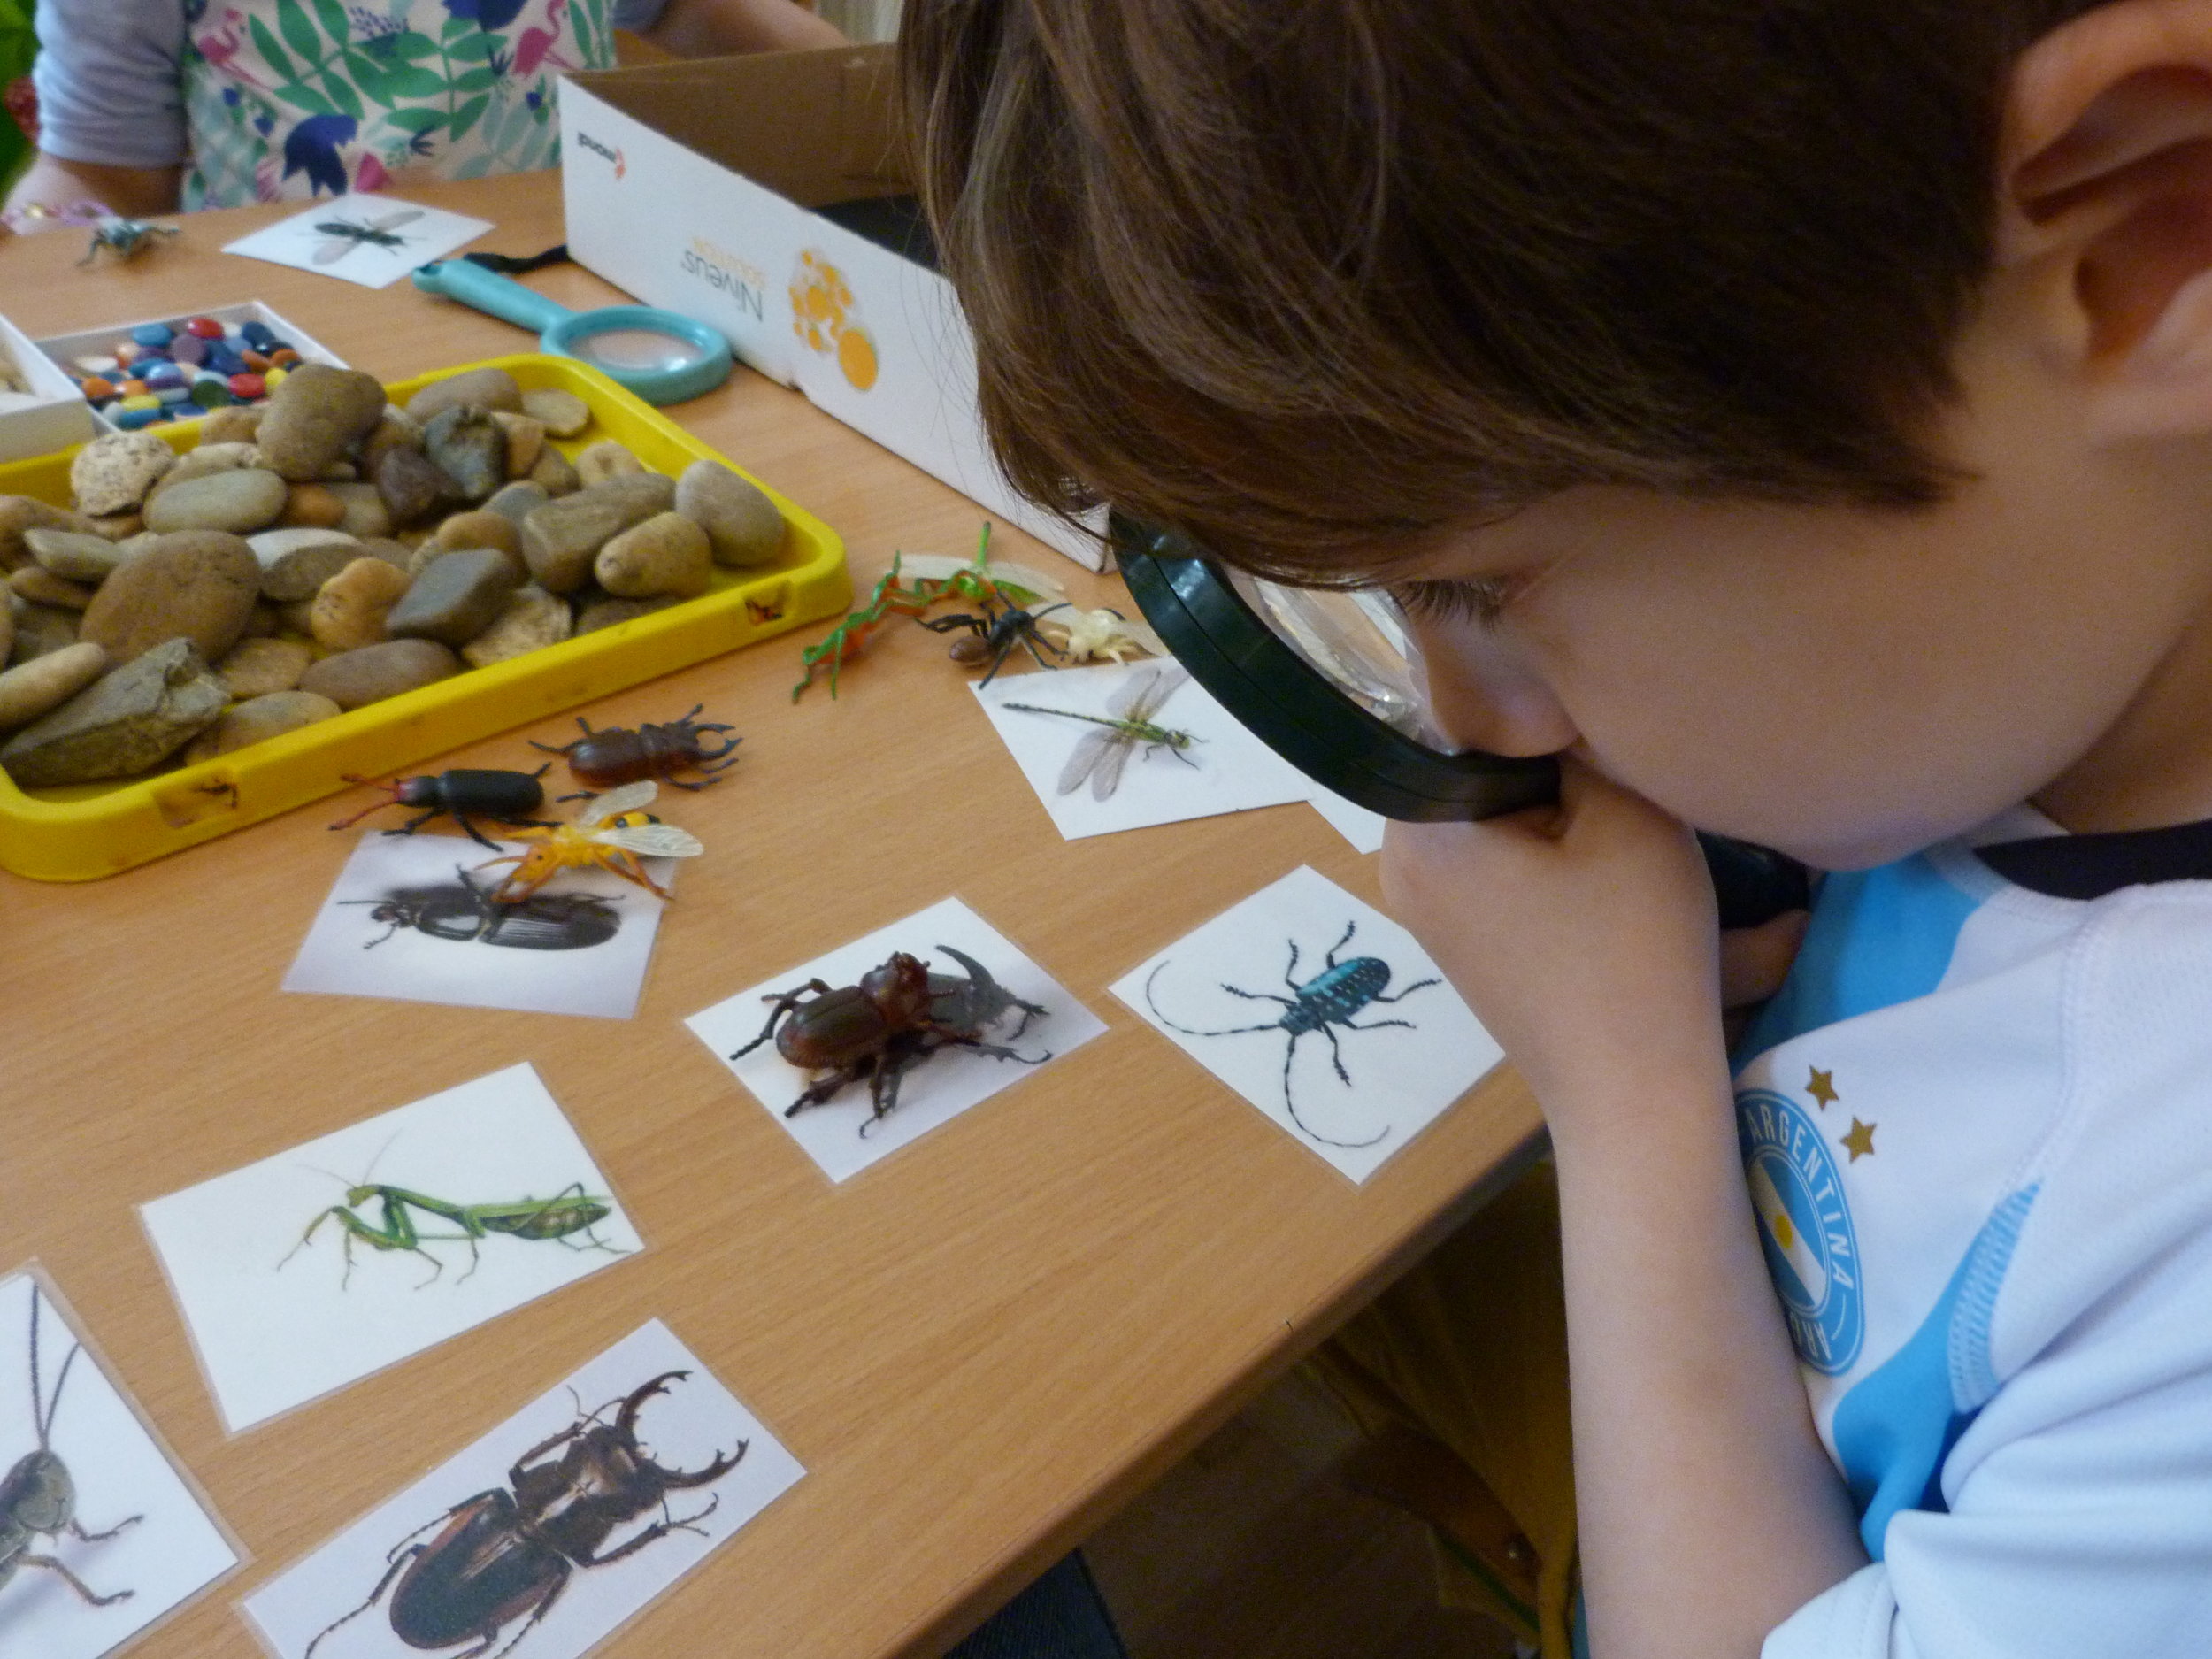 Child Examining Insects with Magnifying Glass